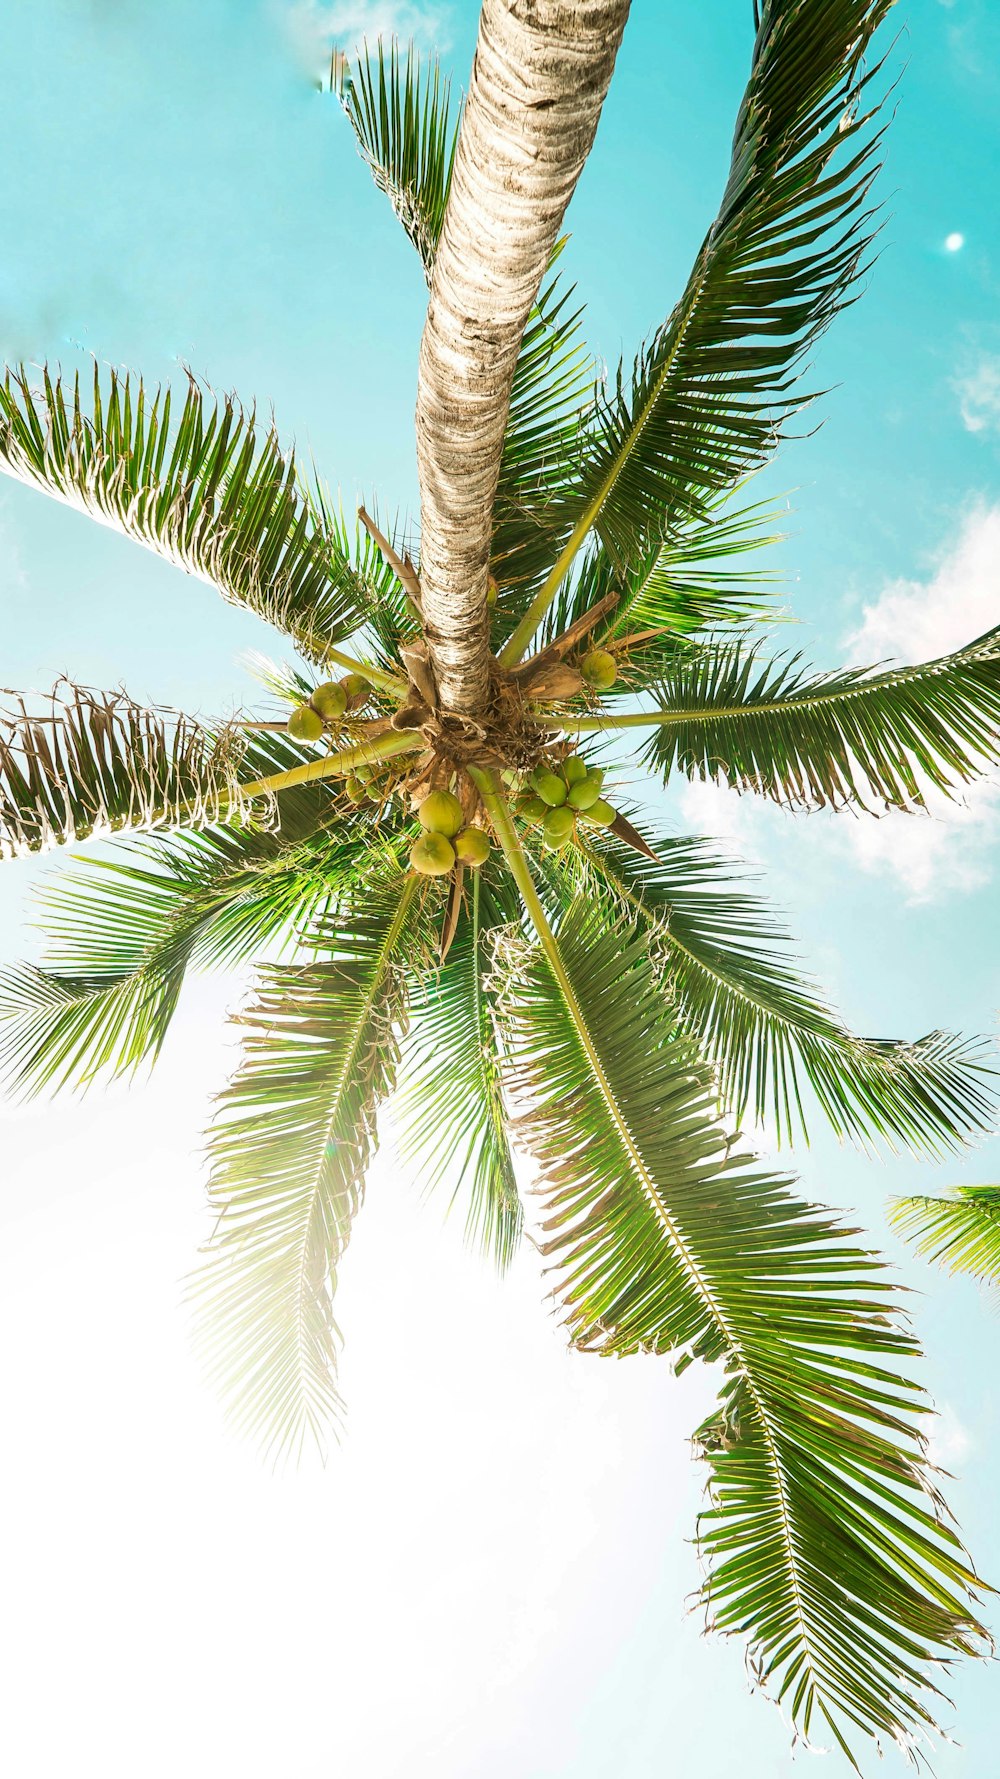 Coconut Trees Pictures | Download Free Images on Unsplash